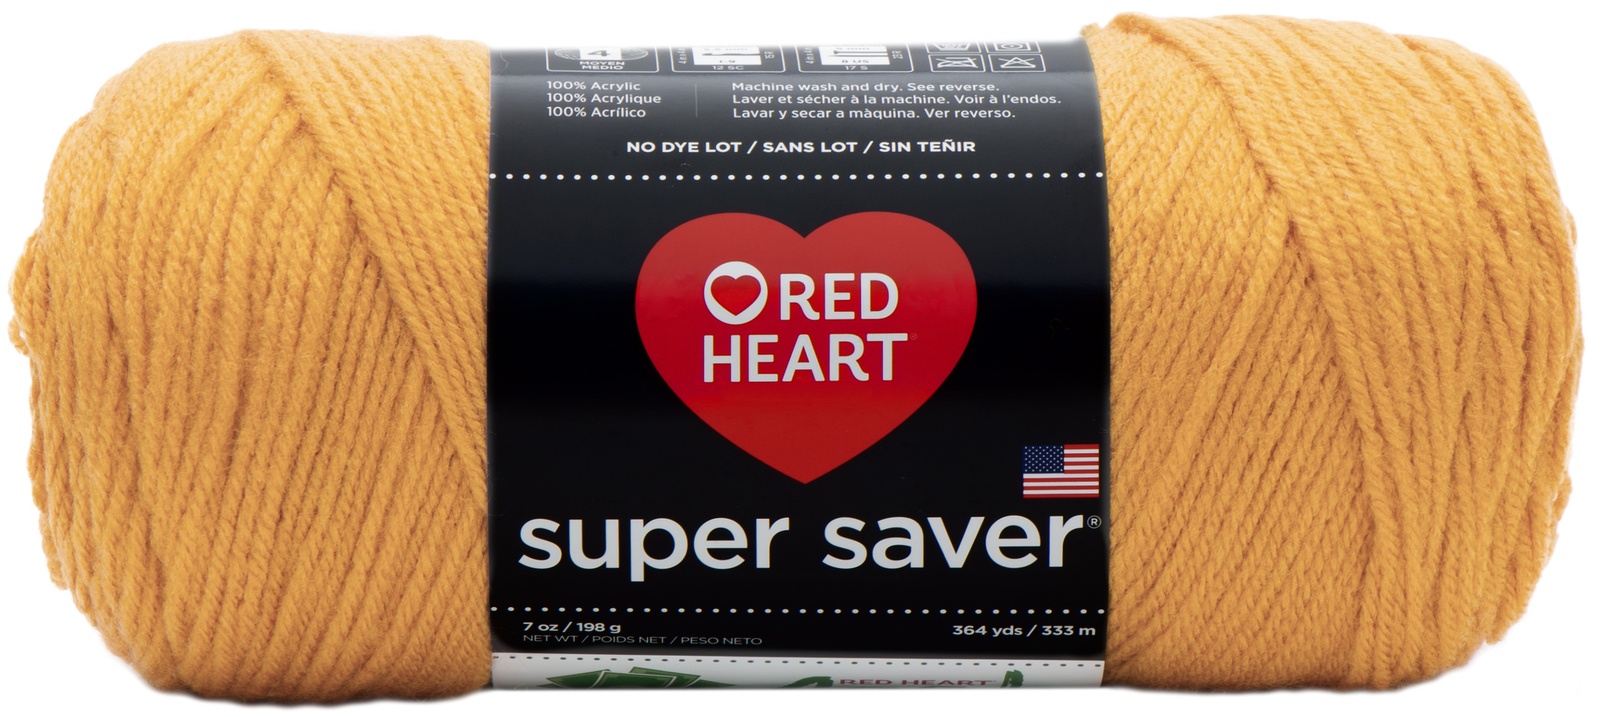 Primary image for Red Heart Super Saver Yarn Gold.